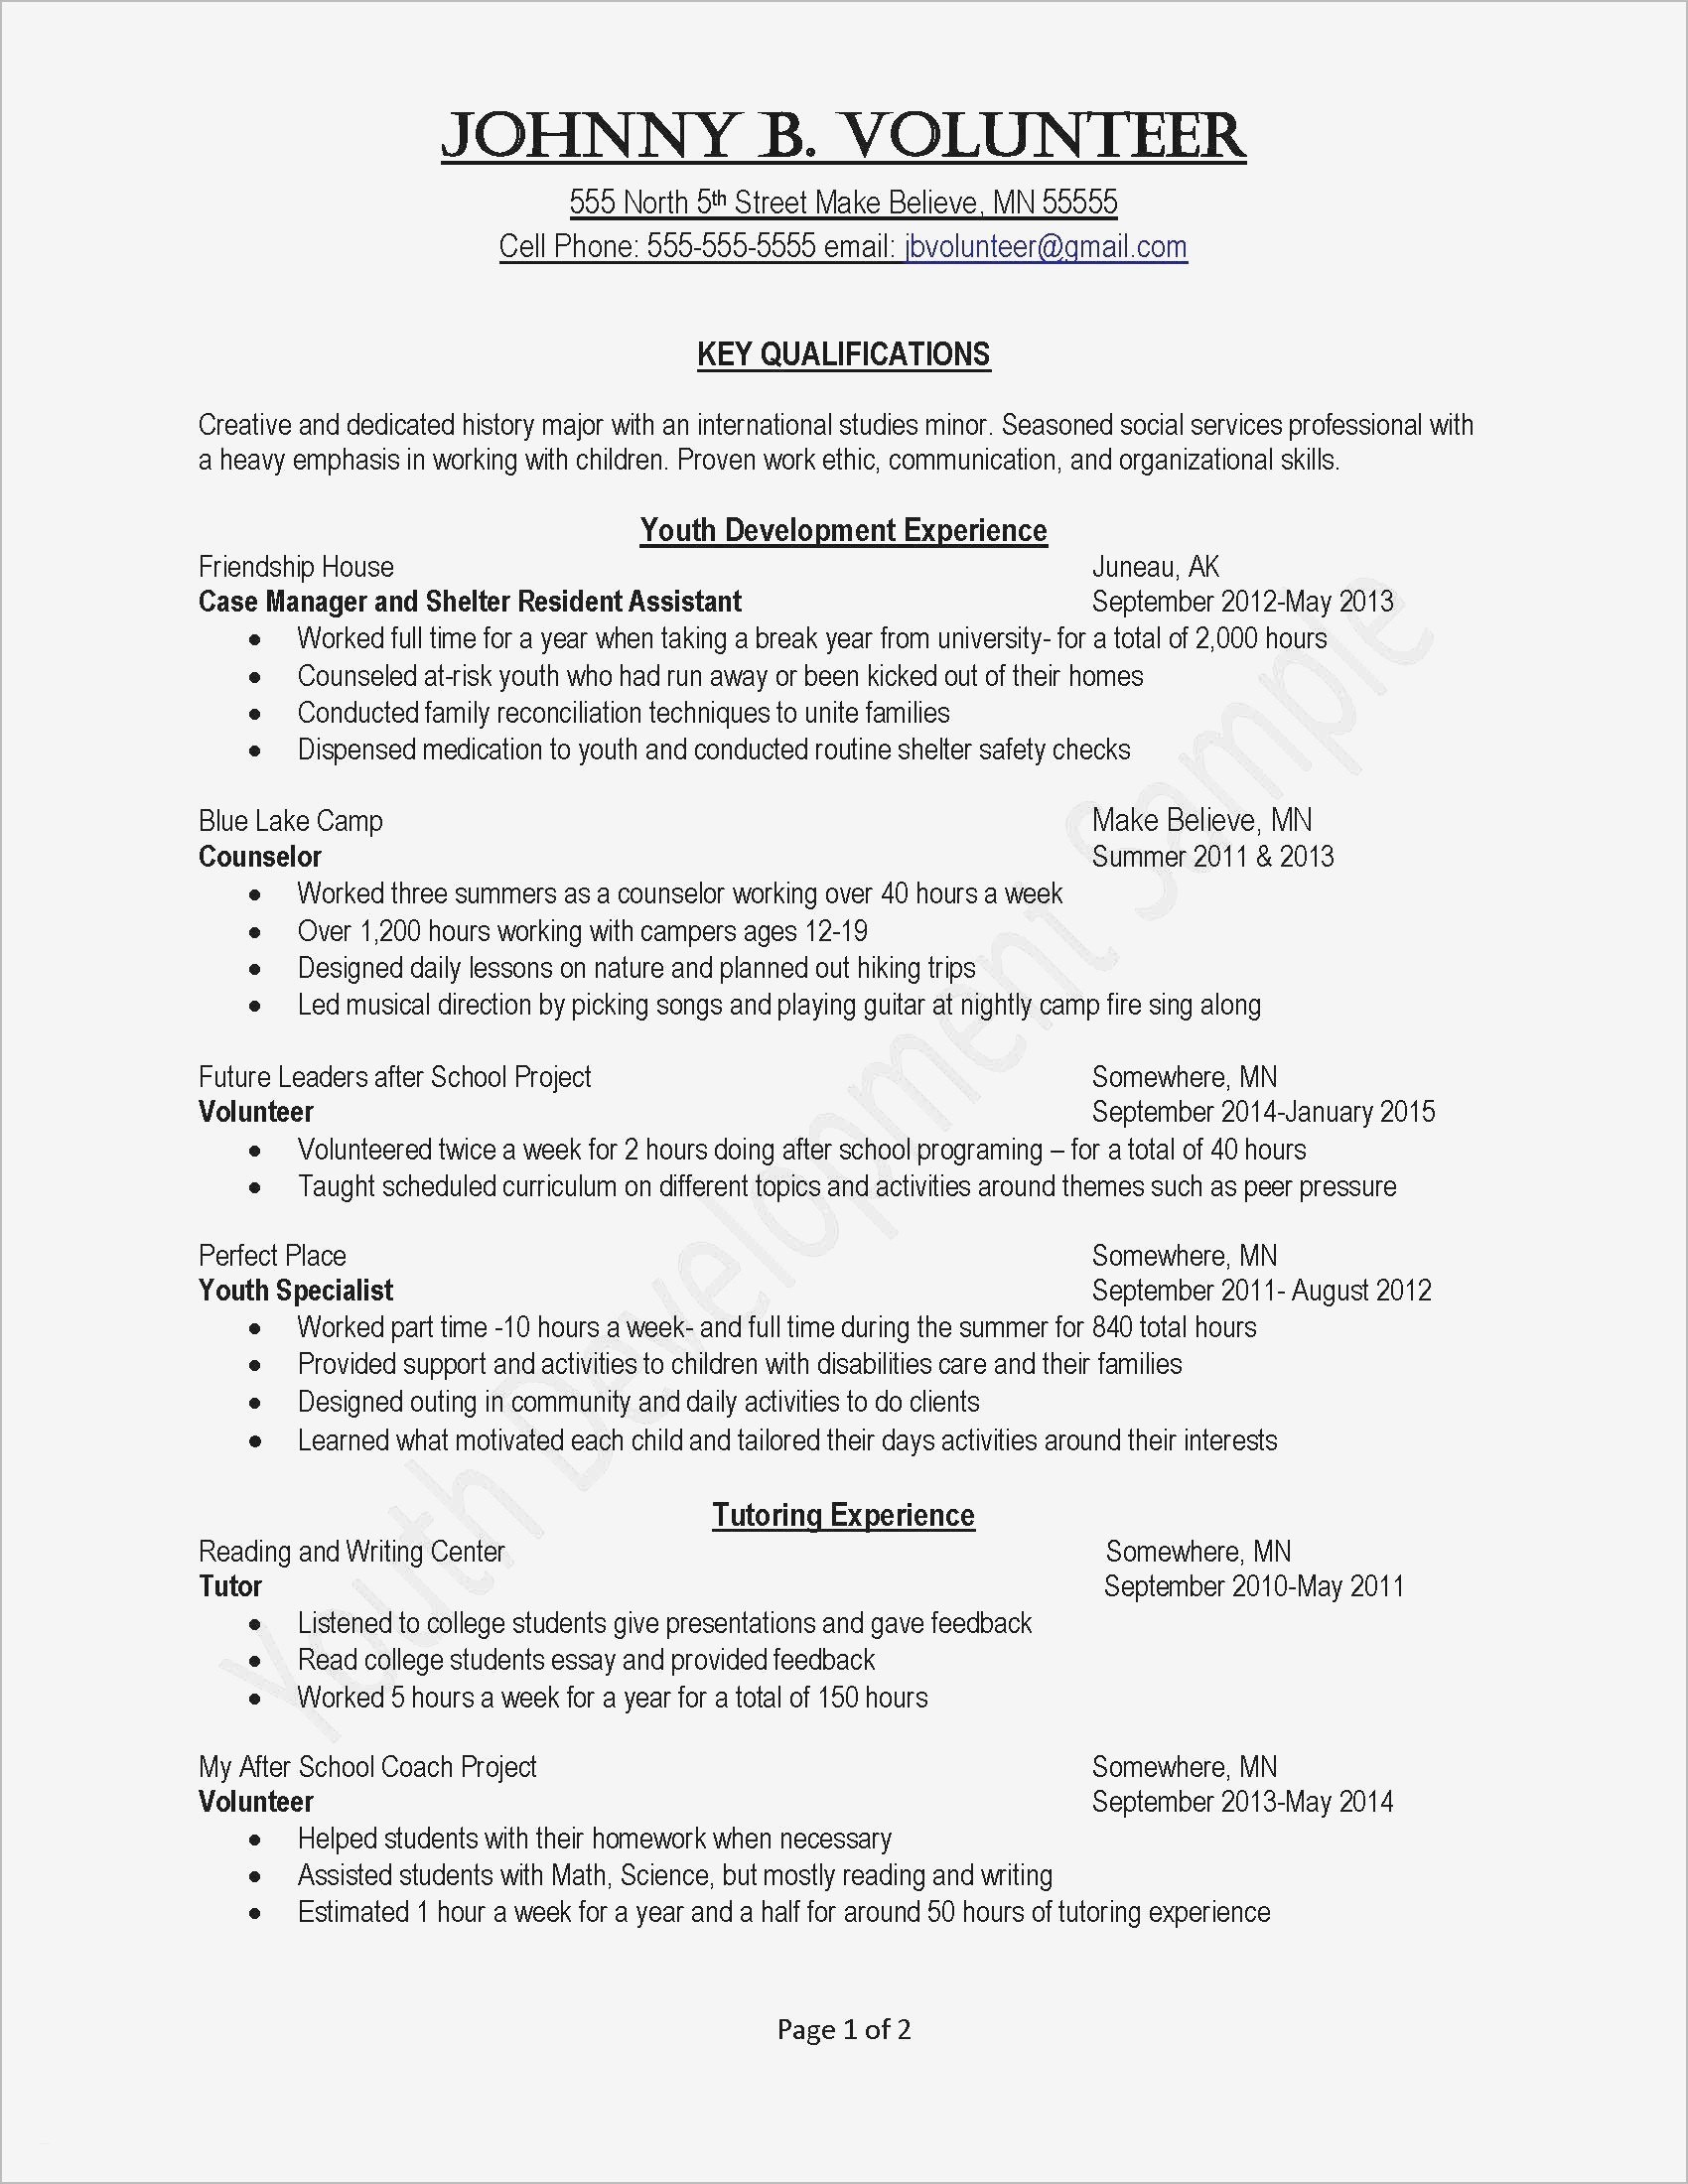 New Board Member orientation Welcome Letter Template - International Student Coordinator Cover Letter